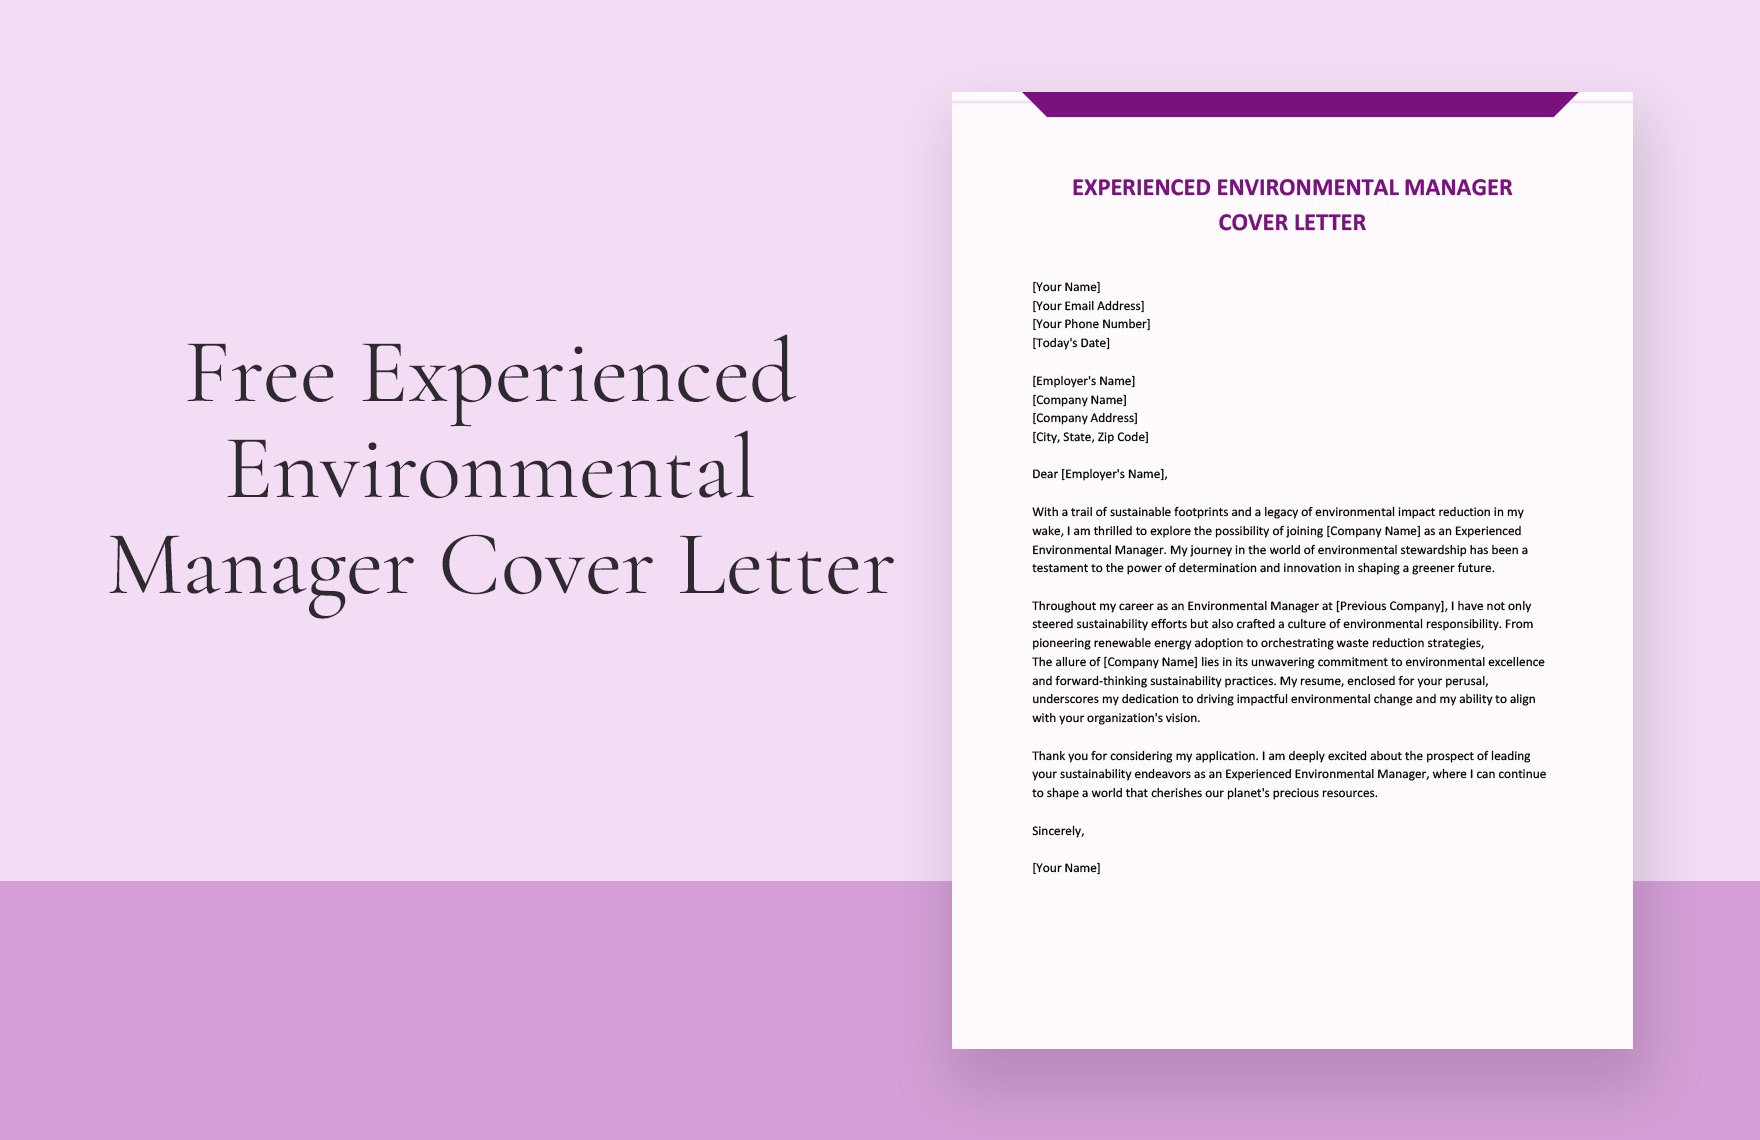 Experienced Environmental Manager Cover Letter in Word, Google Docs